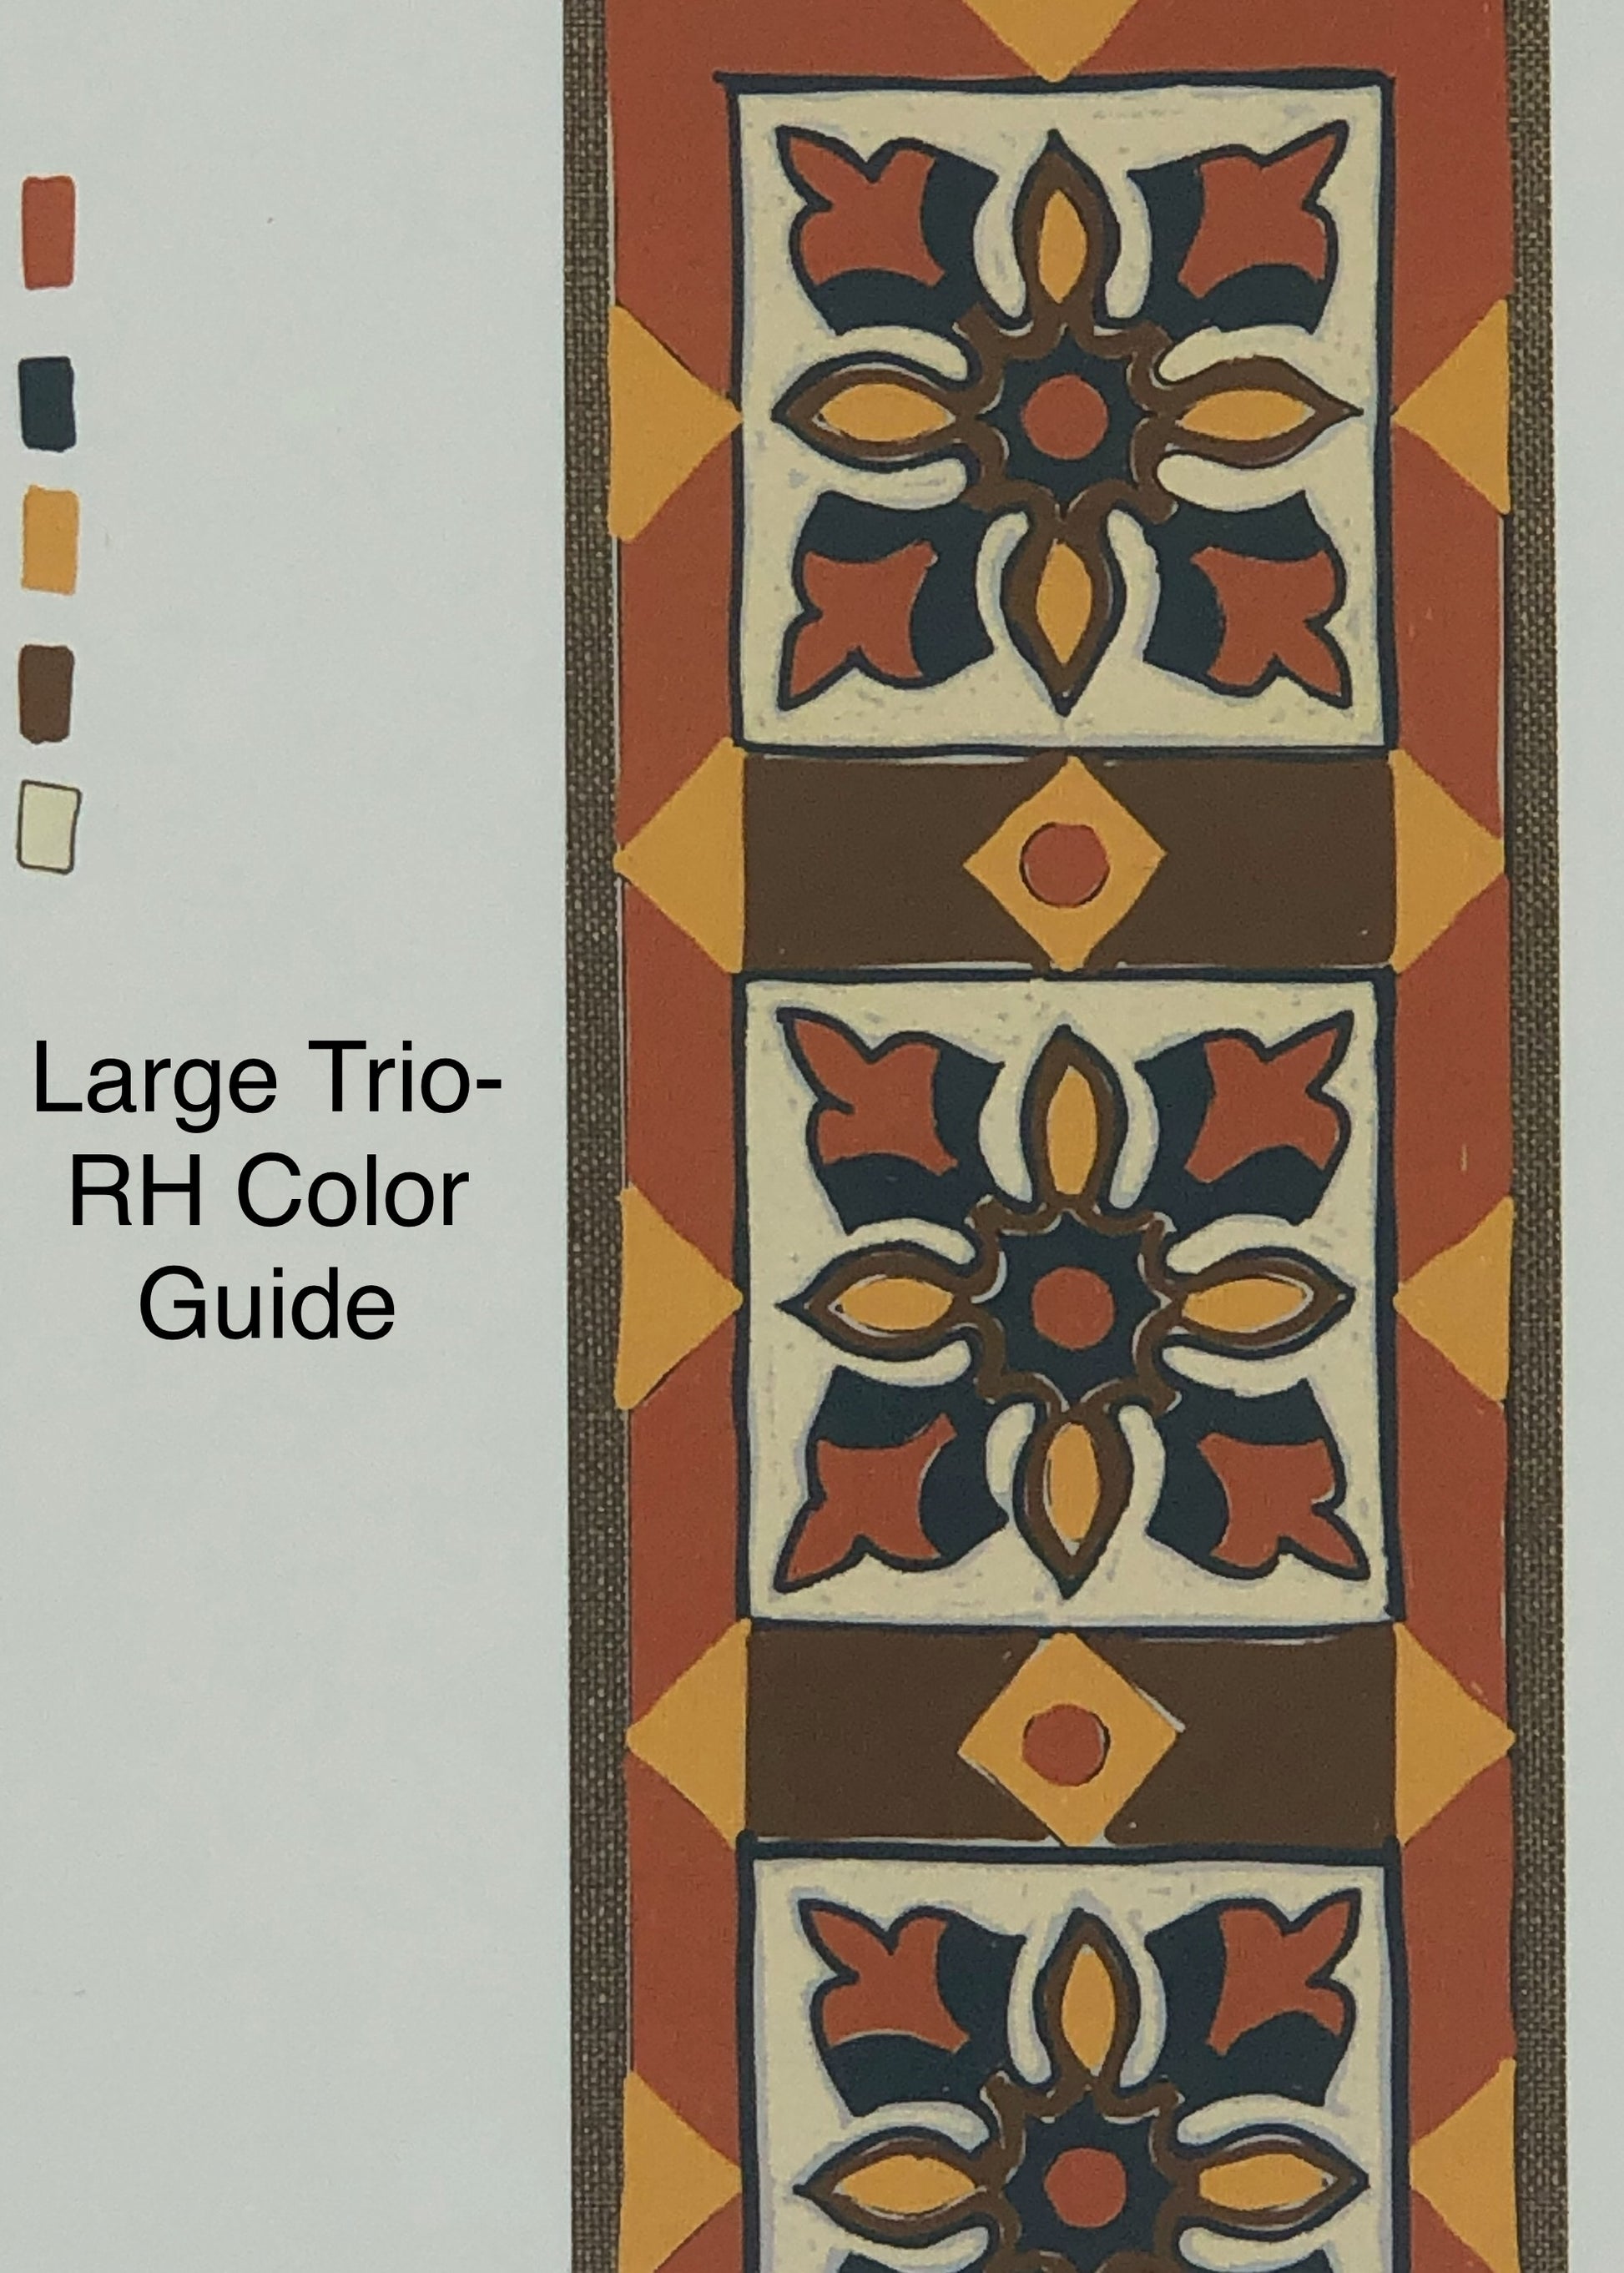 Large Trio- Paper Rug Hooking or Rug Punch Needle Pattern by Orphaned Wool. This pattern makes a wonderful table runner or floor runner rug. Paper Pattern was designed to be enlarged and allows you to customize the size pattern you want to create.